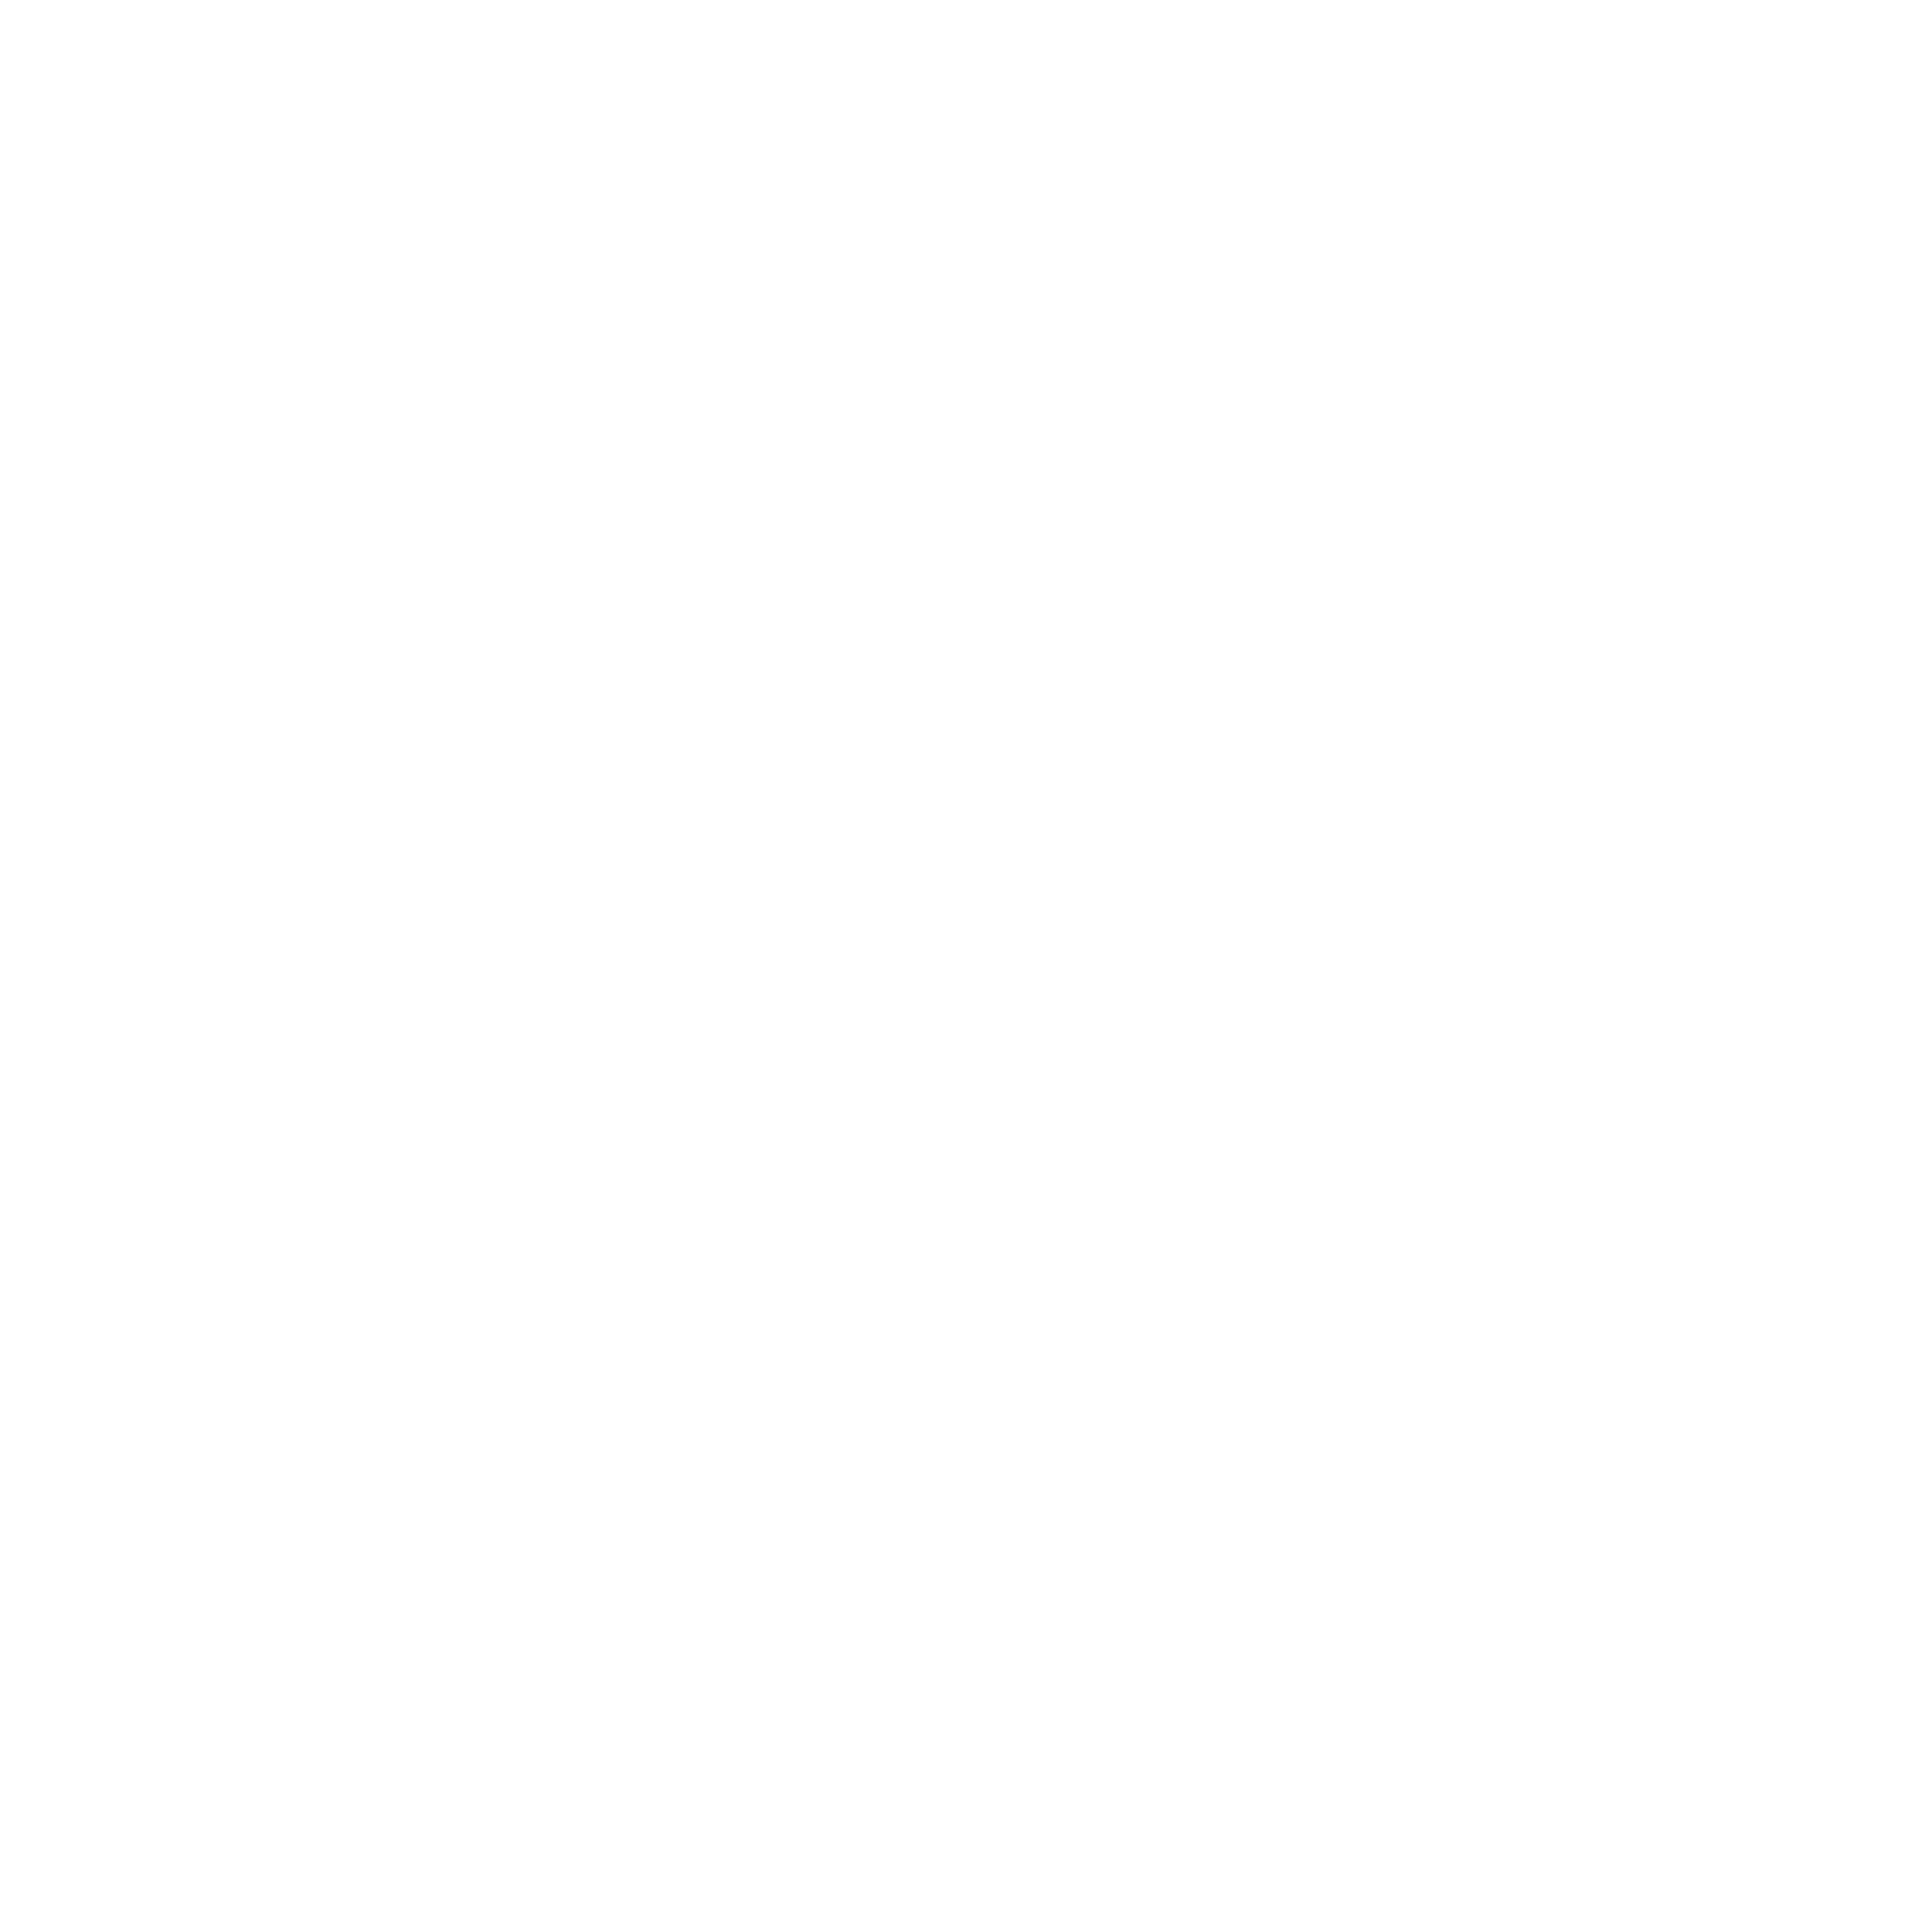 Half Wrap - This is a great way to add a pop of colour at a cheaper cost as you will see the original paint. This can be paired with small designs